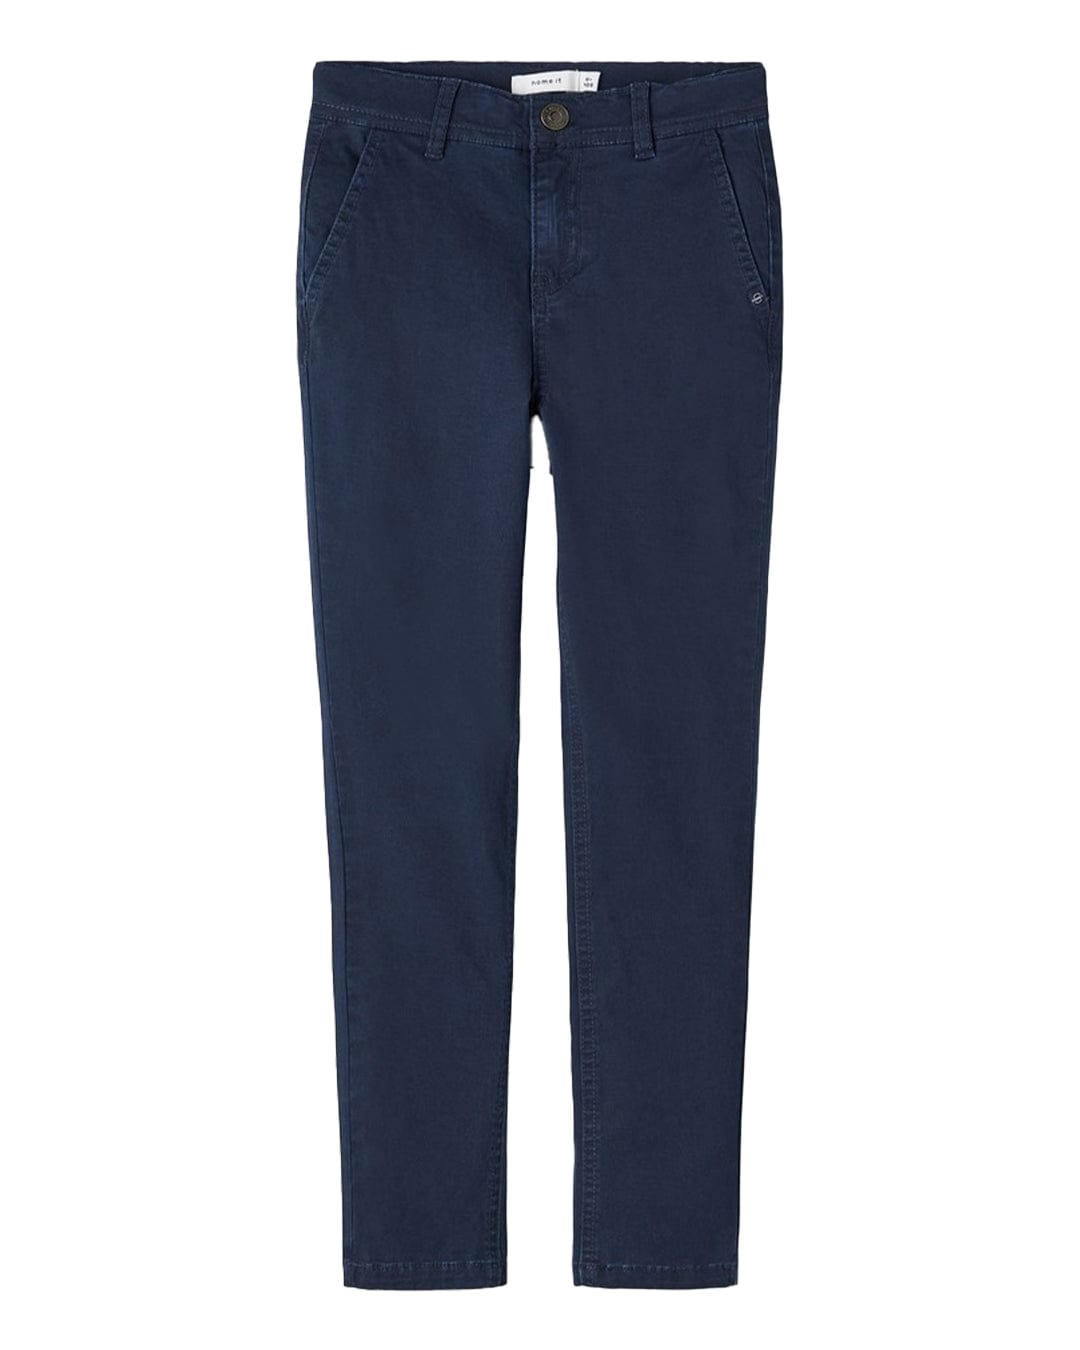 Name It Trousers Name It Ryan Tapered Navy Chino  Trousers